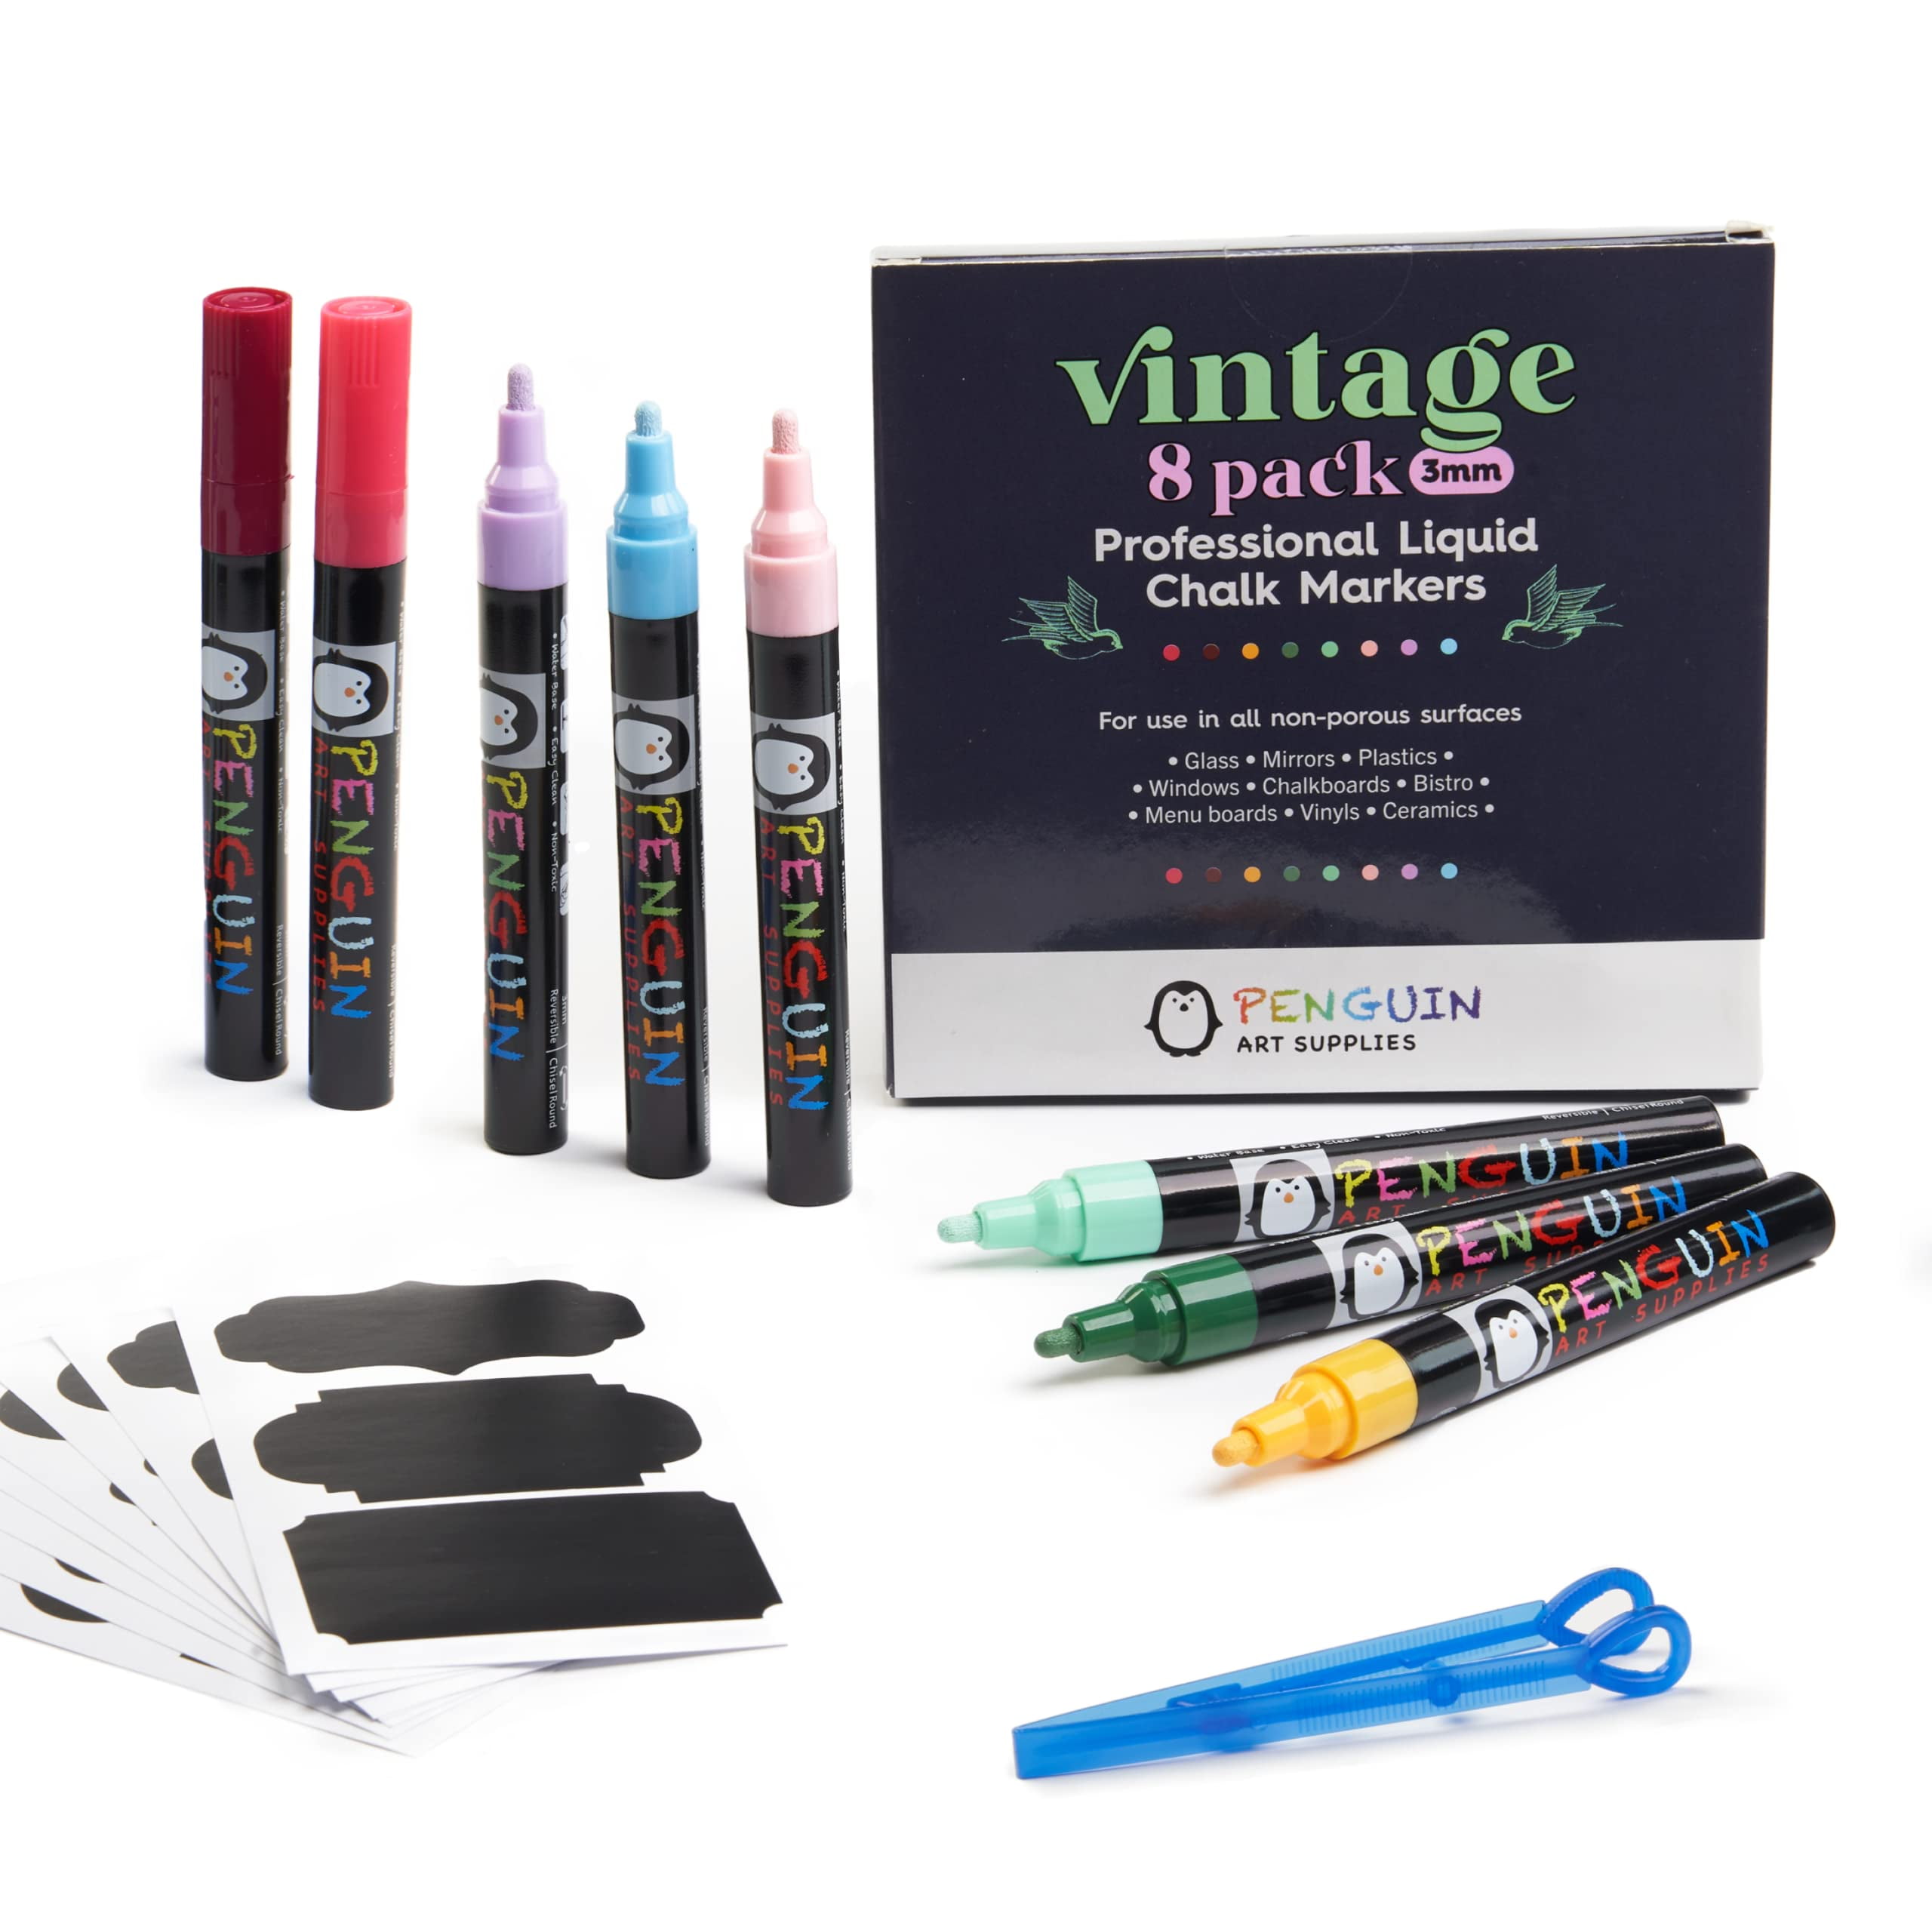 8 Pack Erasable Liquid Chalk Markers Wet Erase Markers for Acrylic